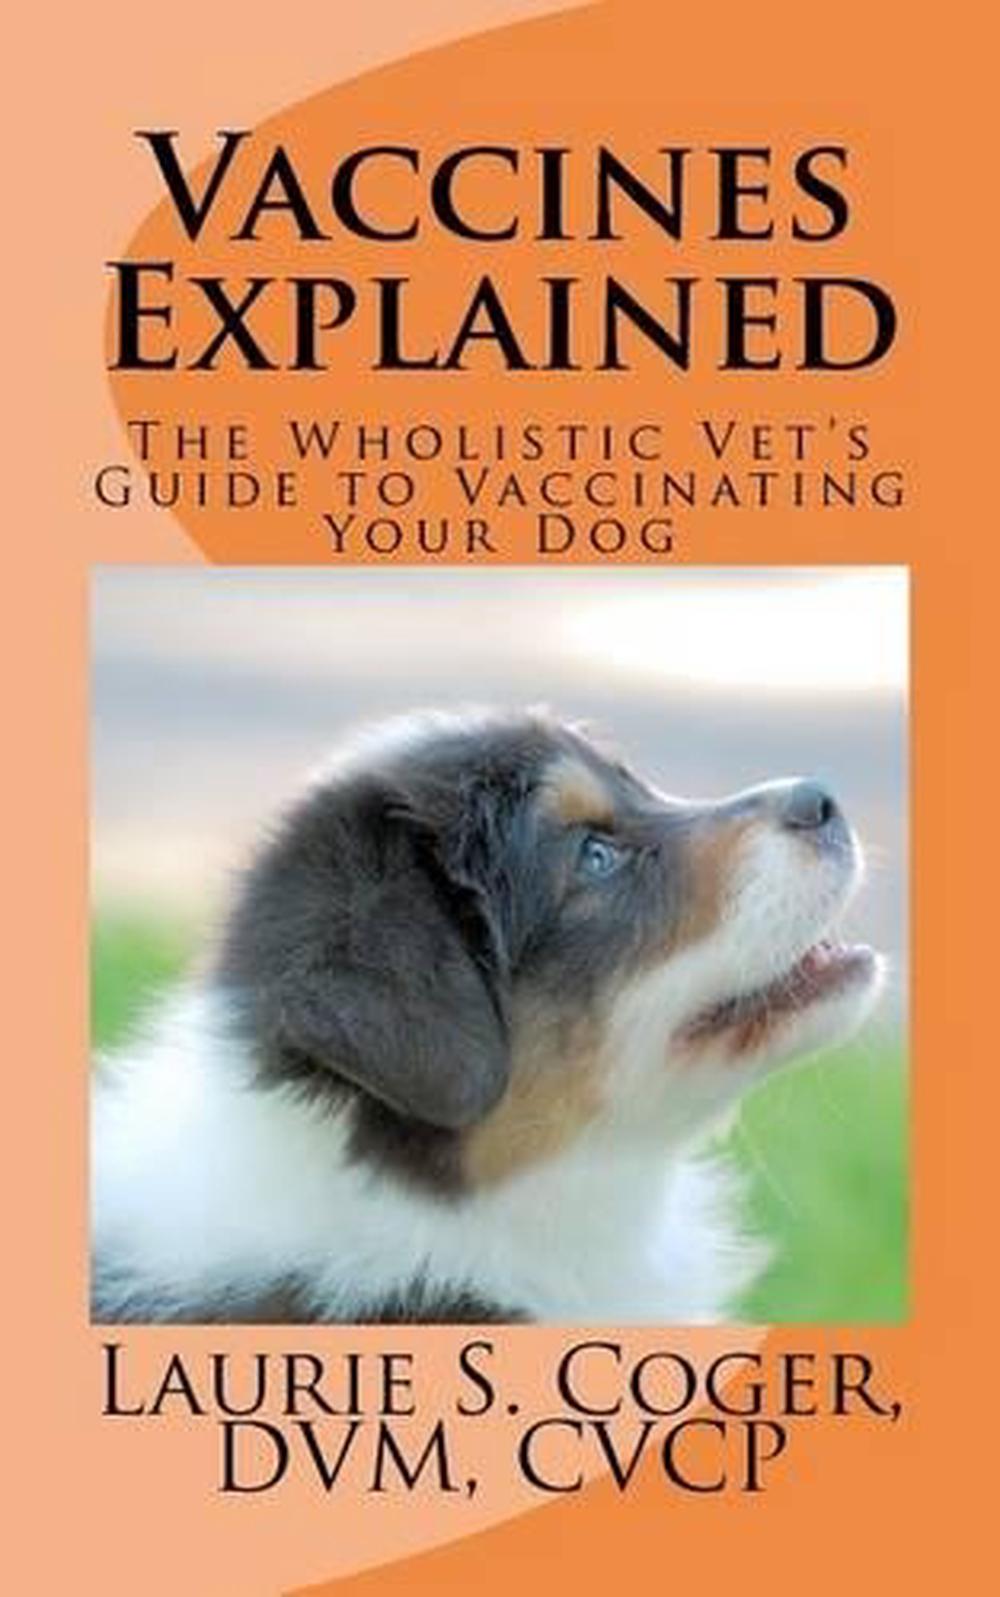 Vaccines Explained The Wholistic Vet's Guide to